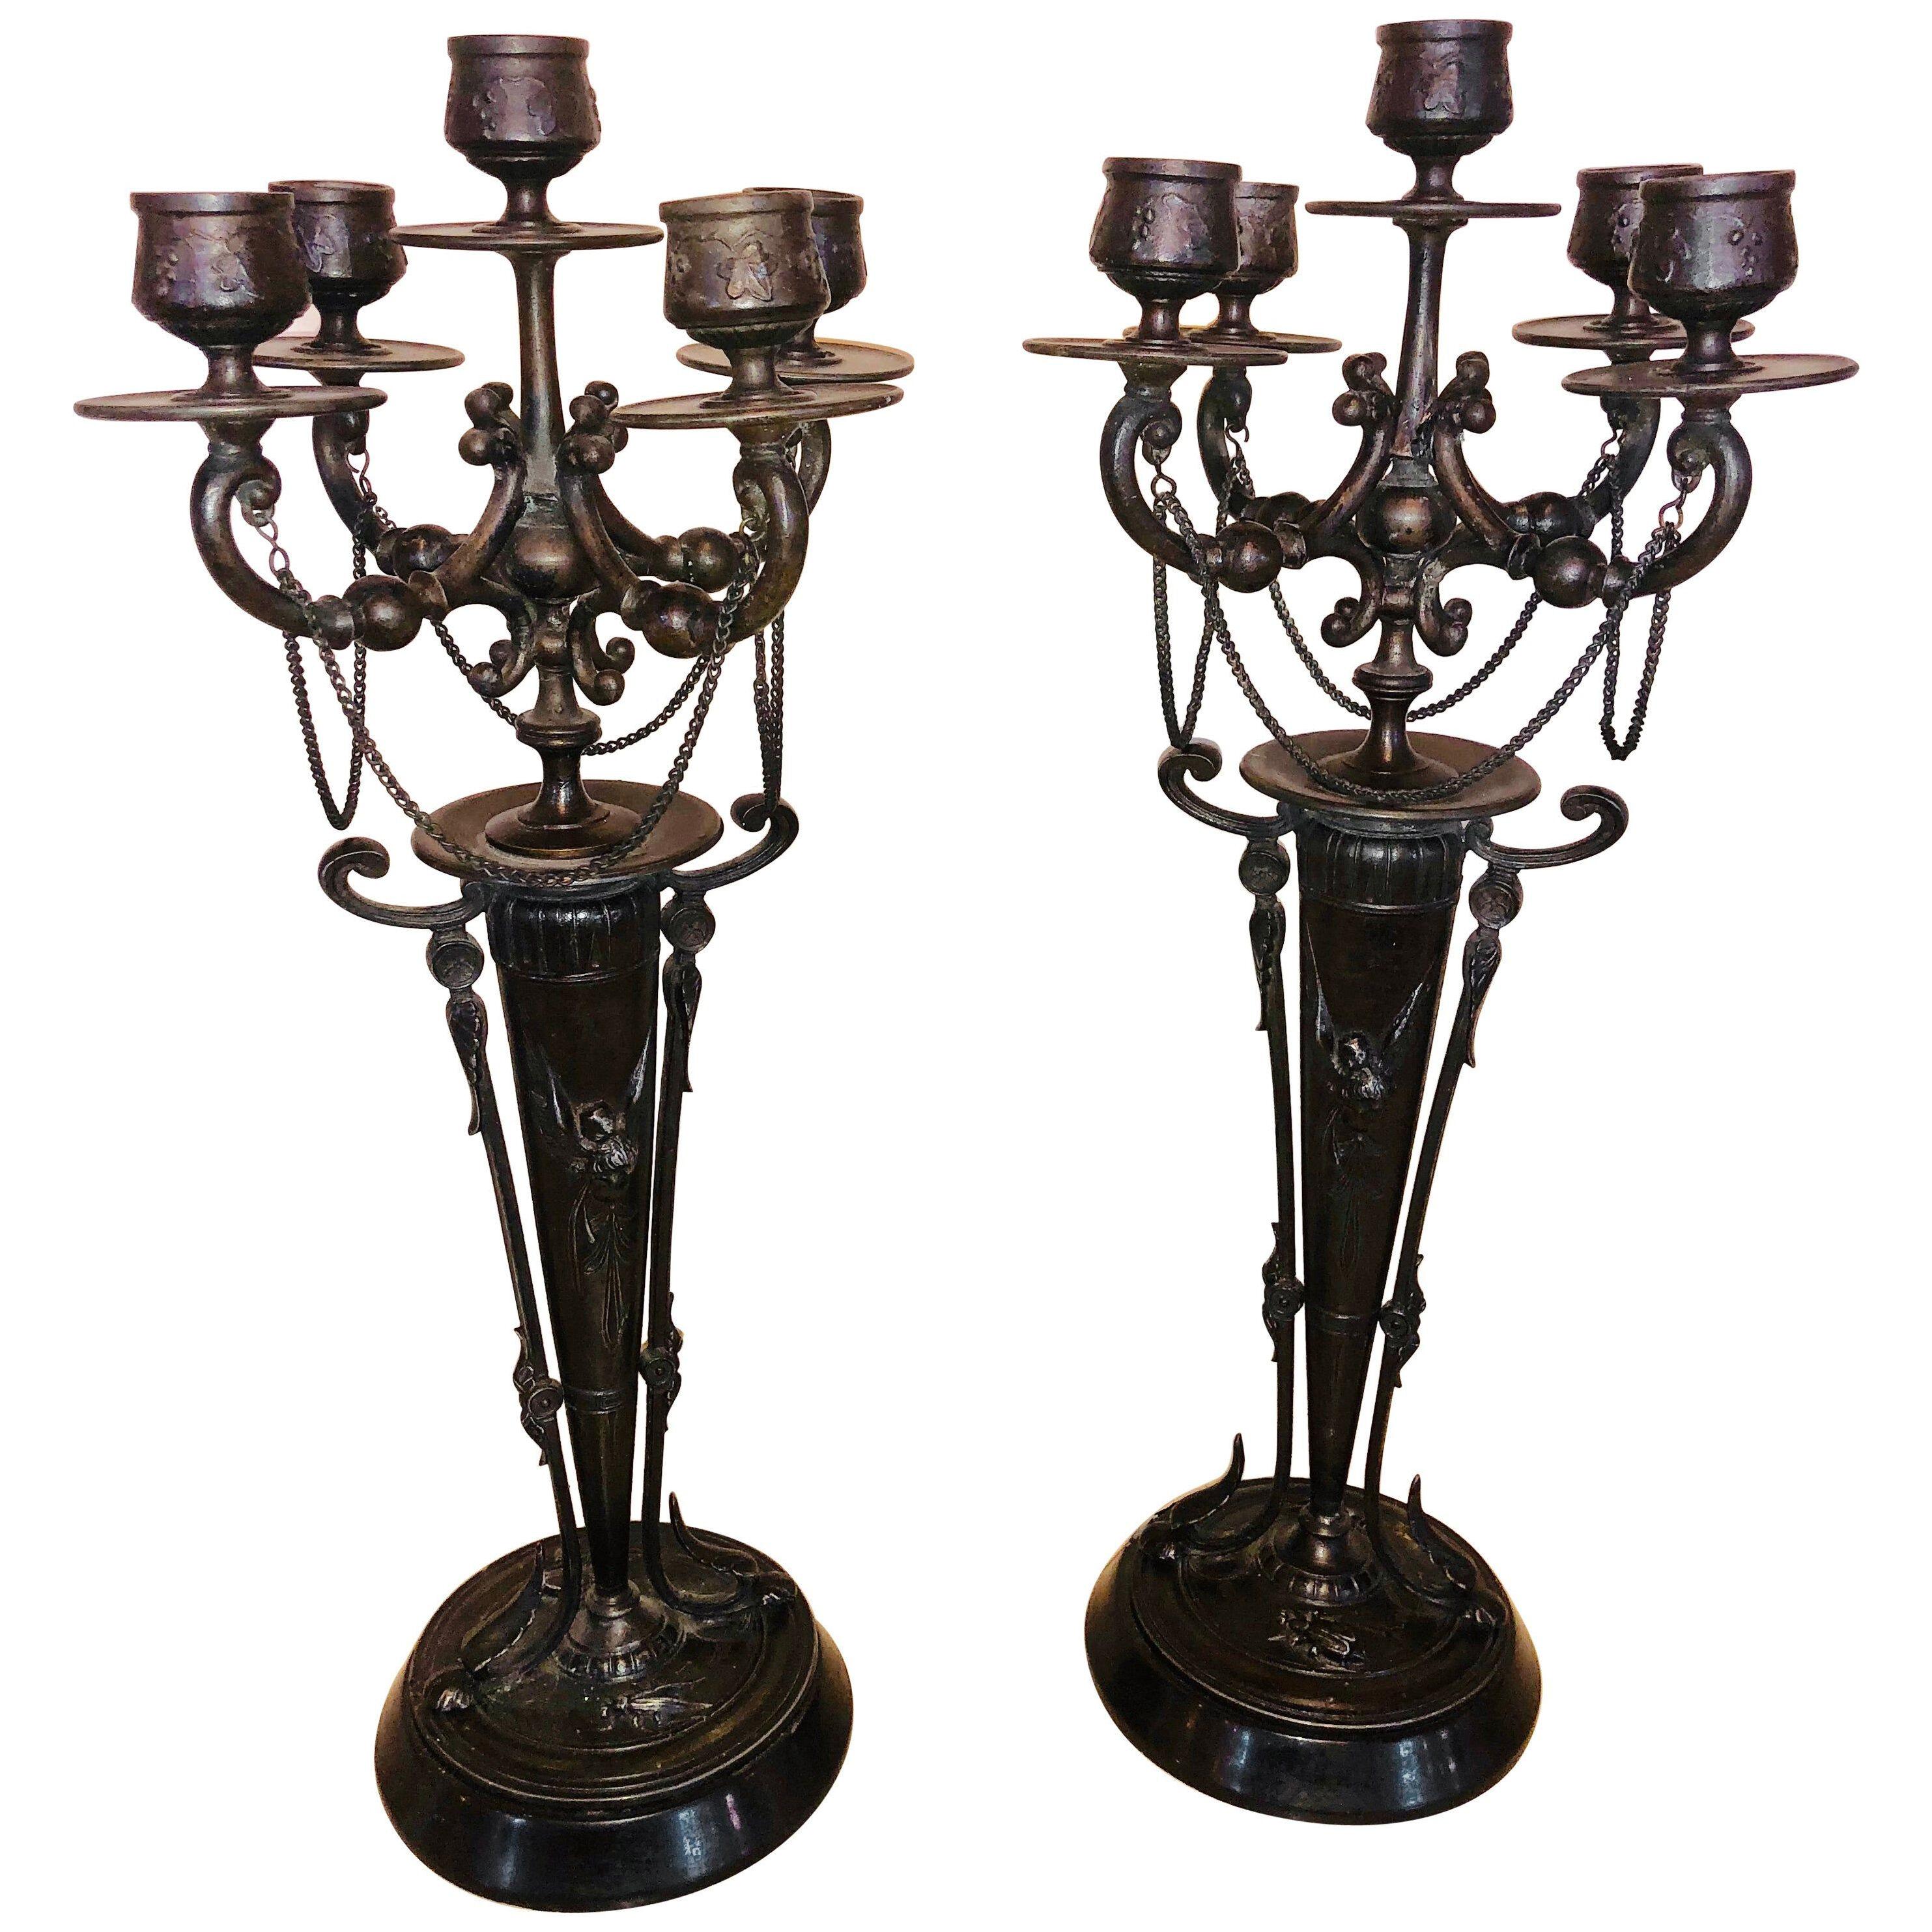 Pair of Empire 19th Century Bronze Candelabras Depicting Insects	